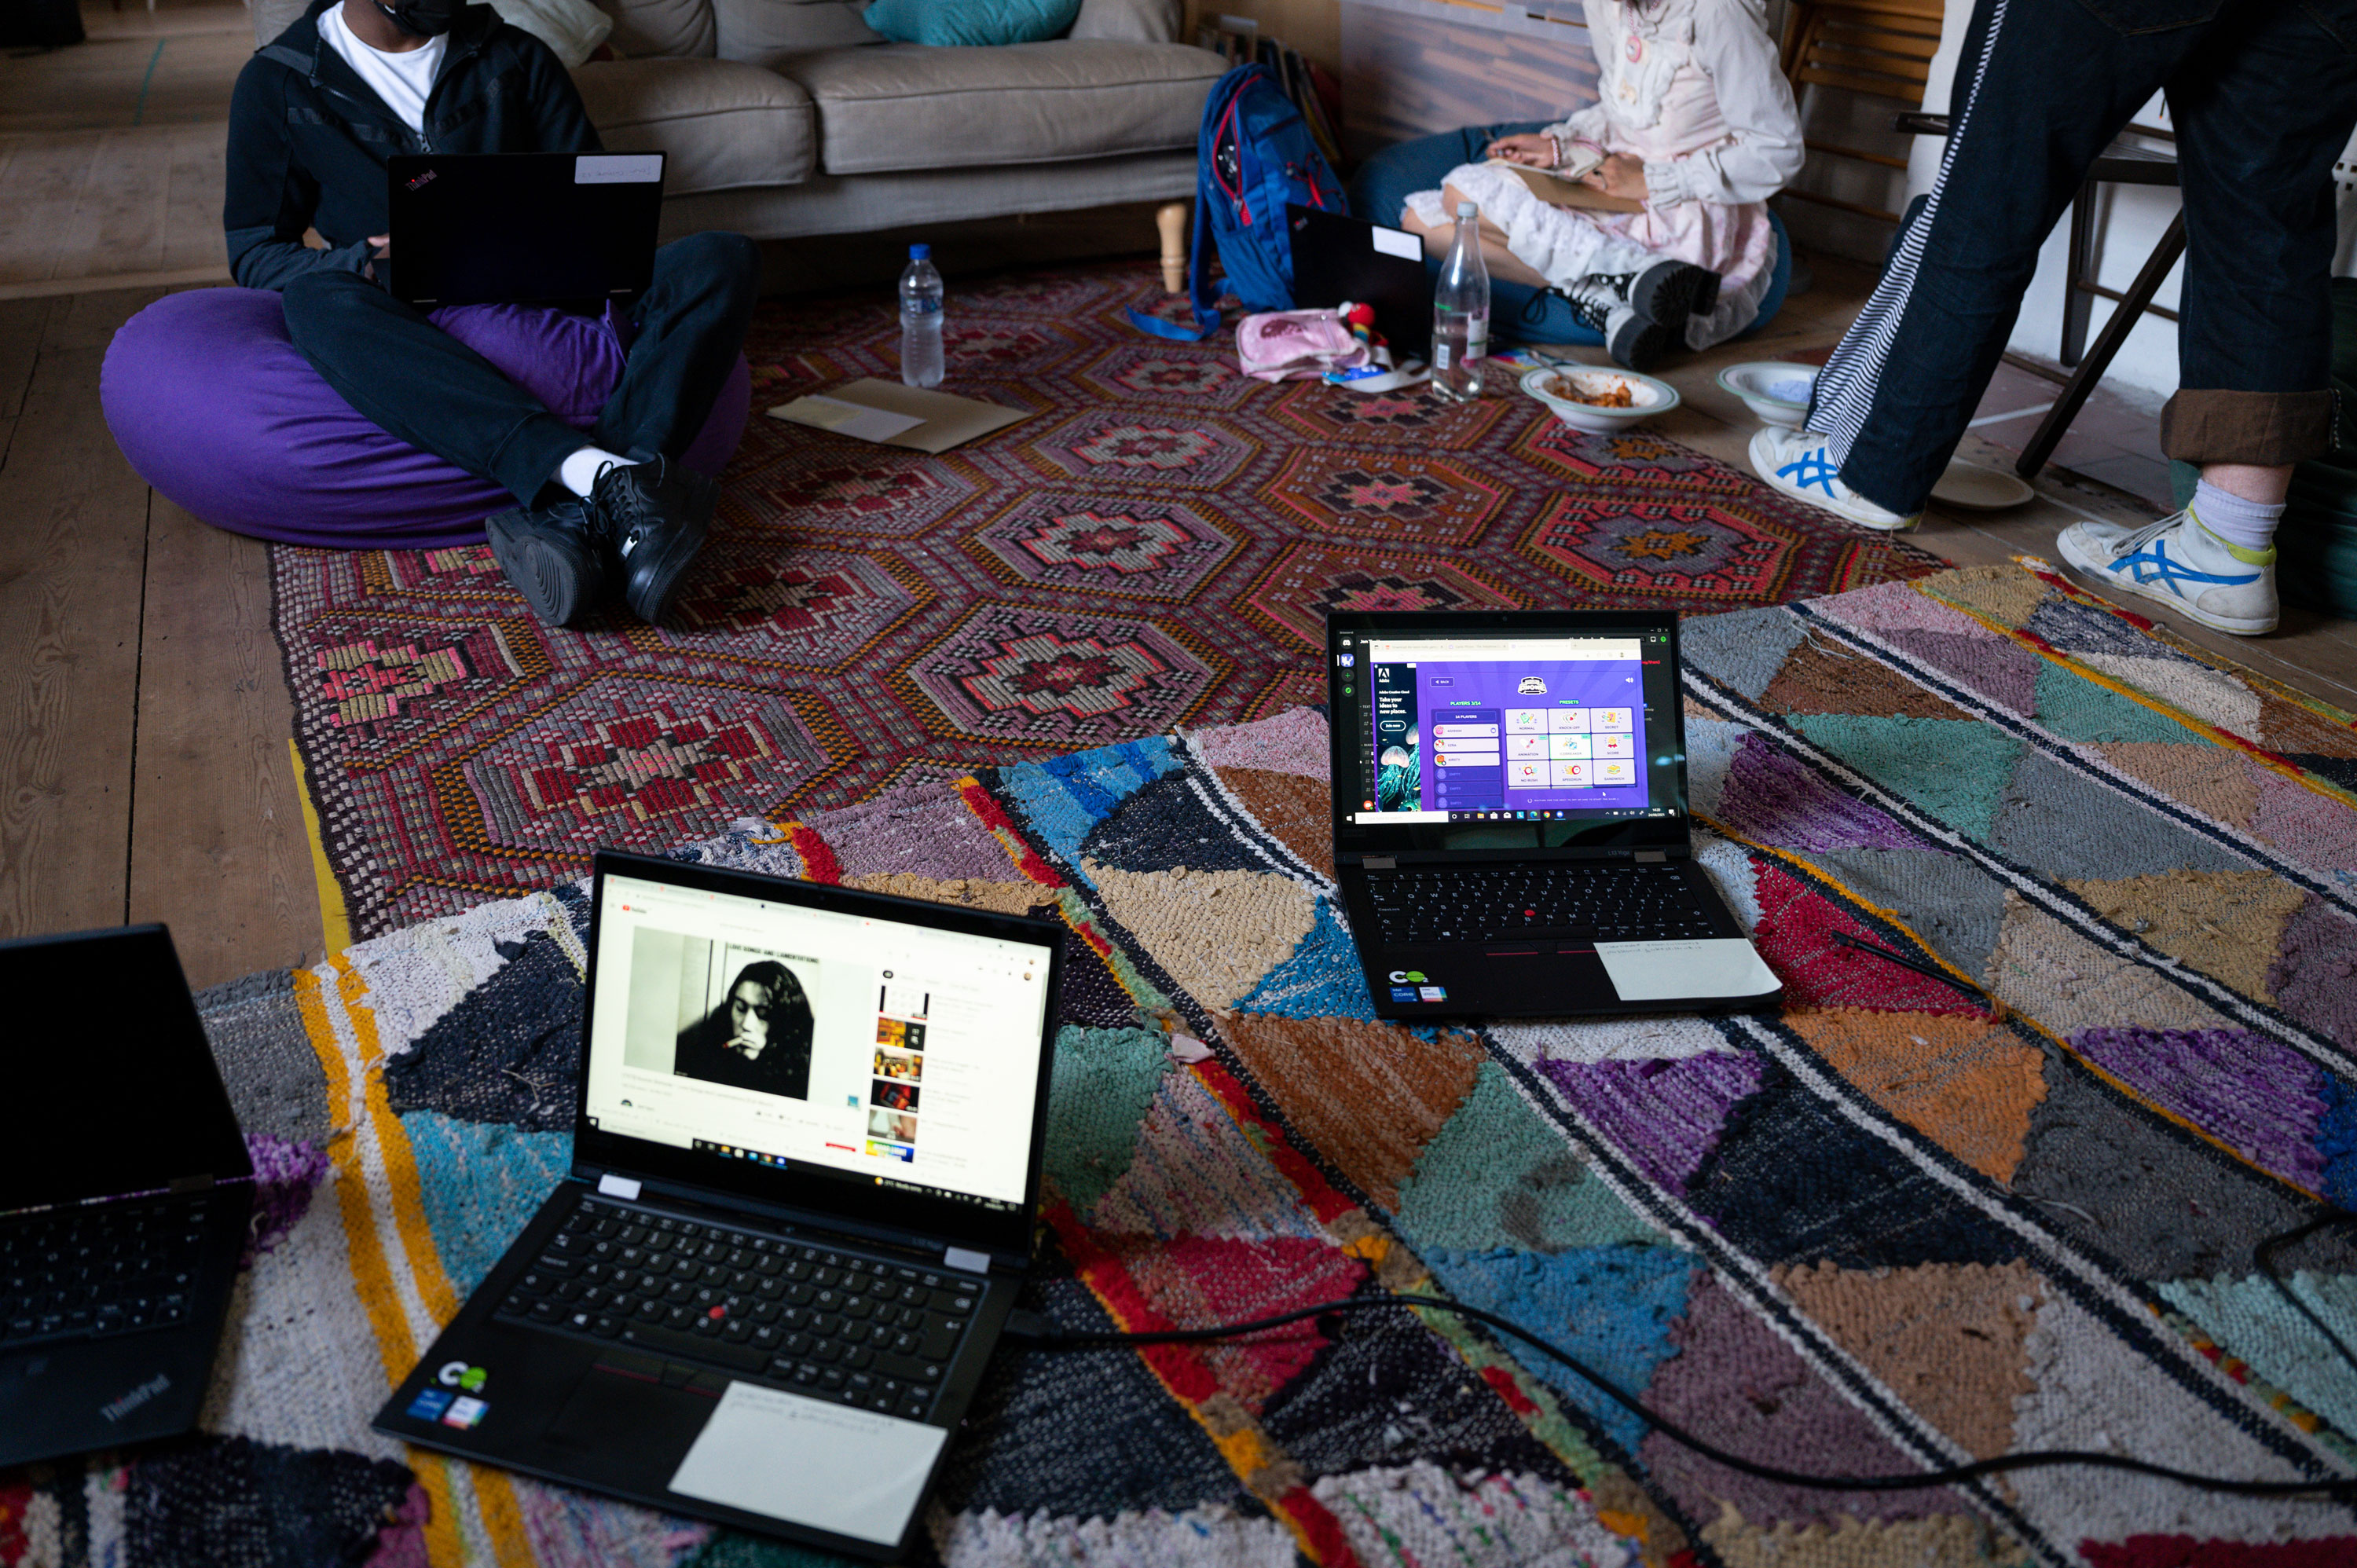 Two participants sitting on the floor using laptops to create digital art work